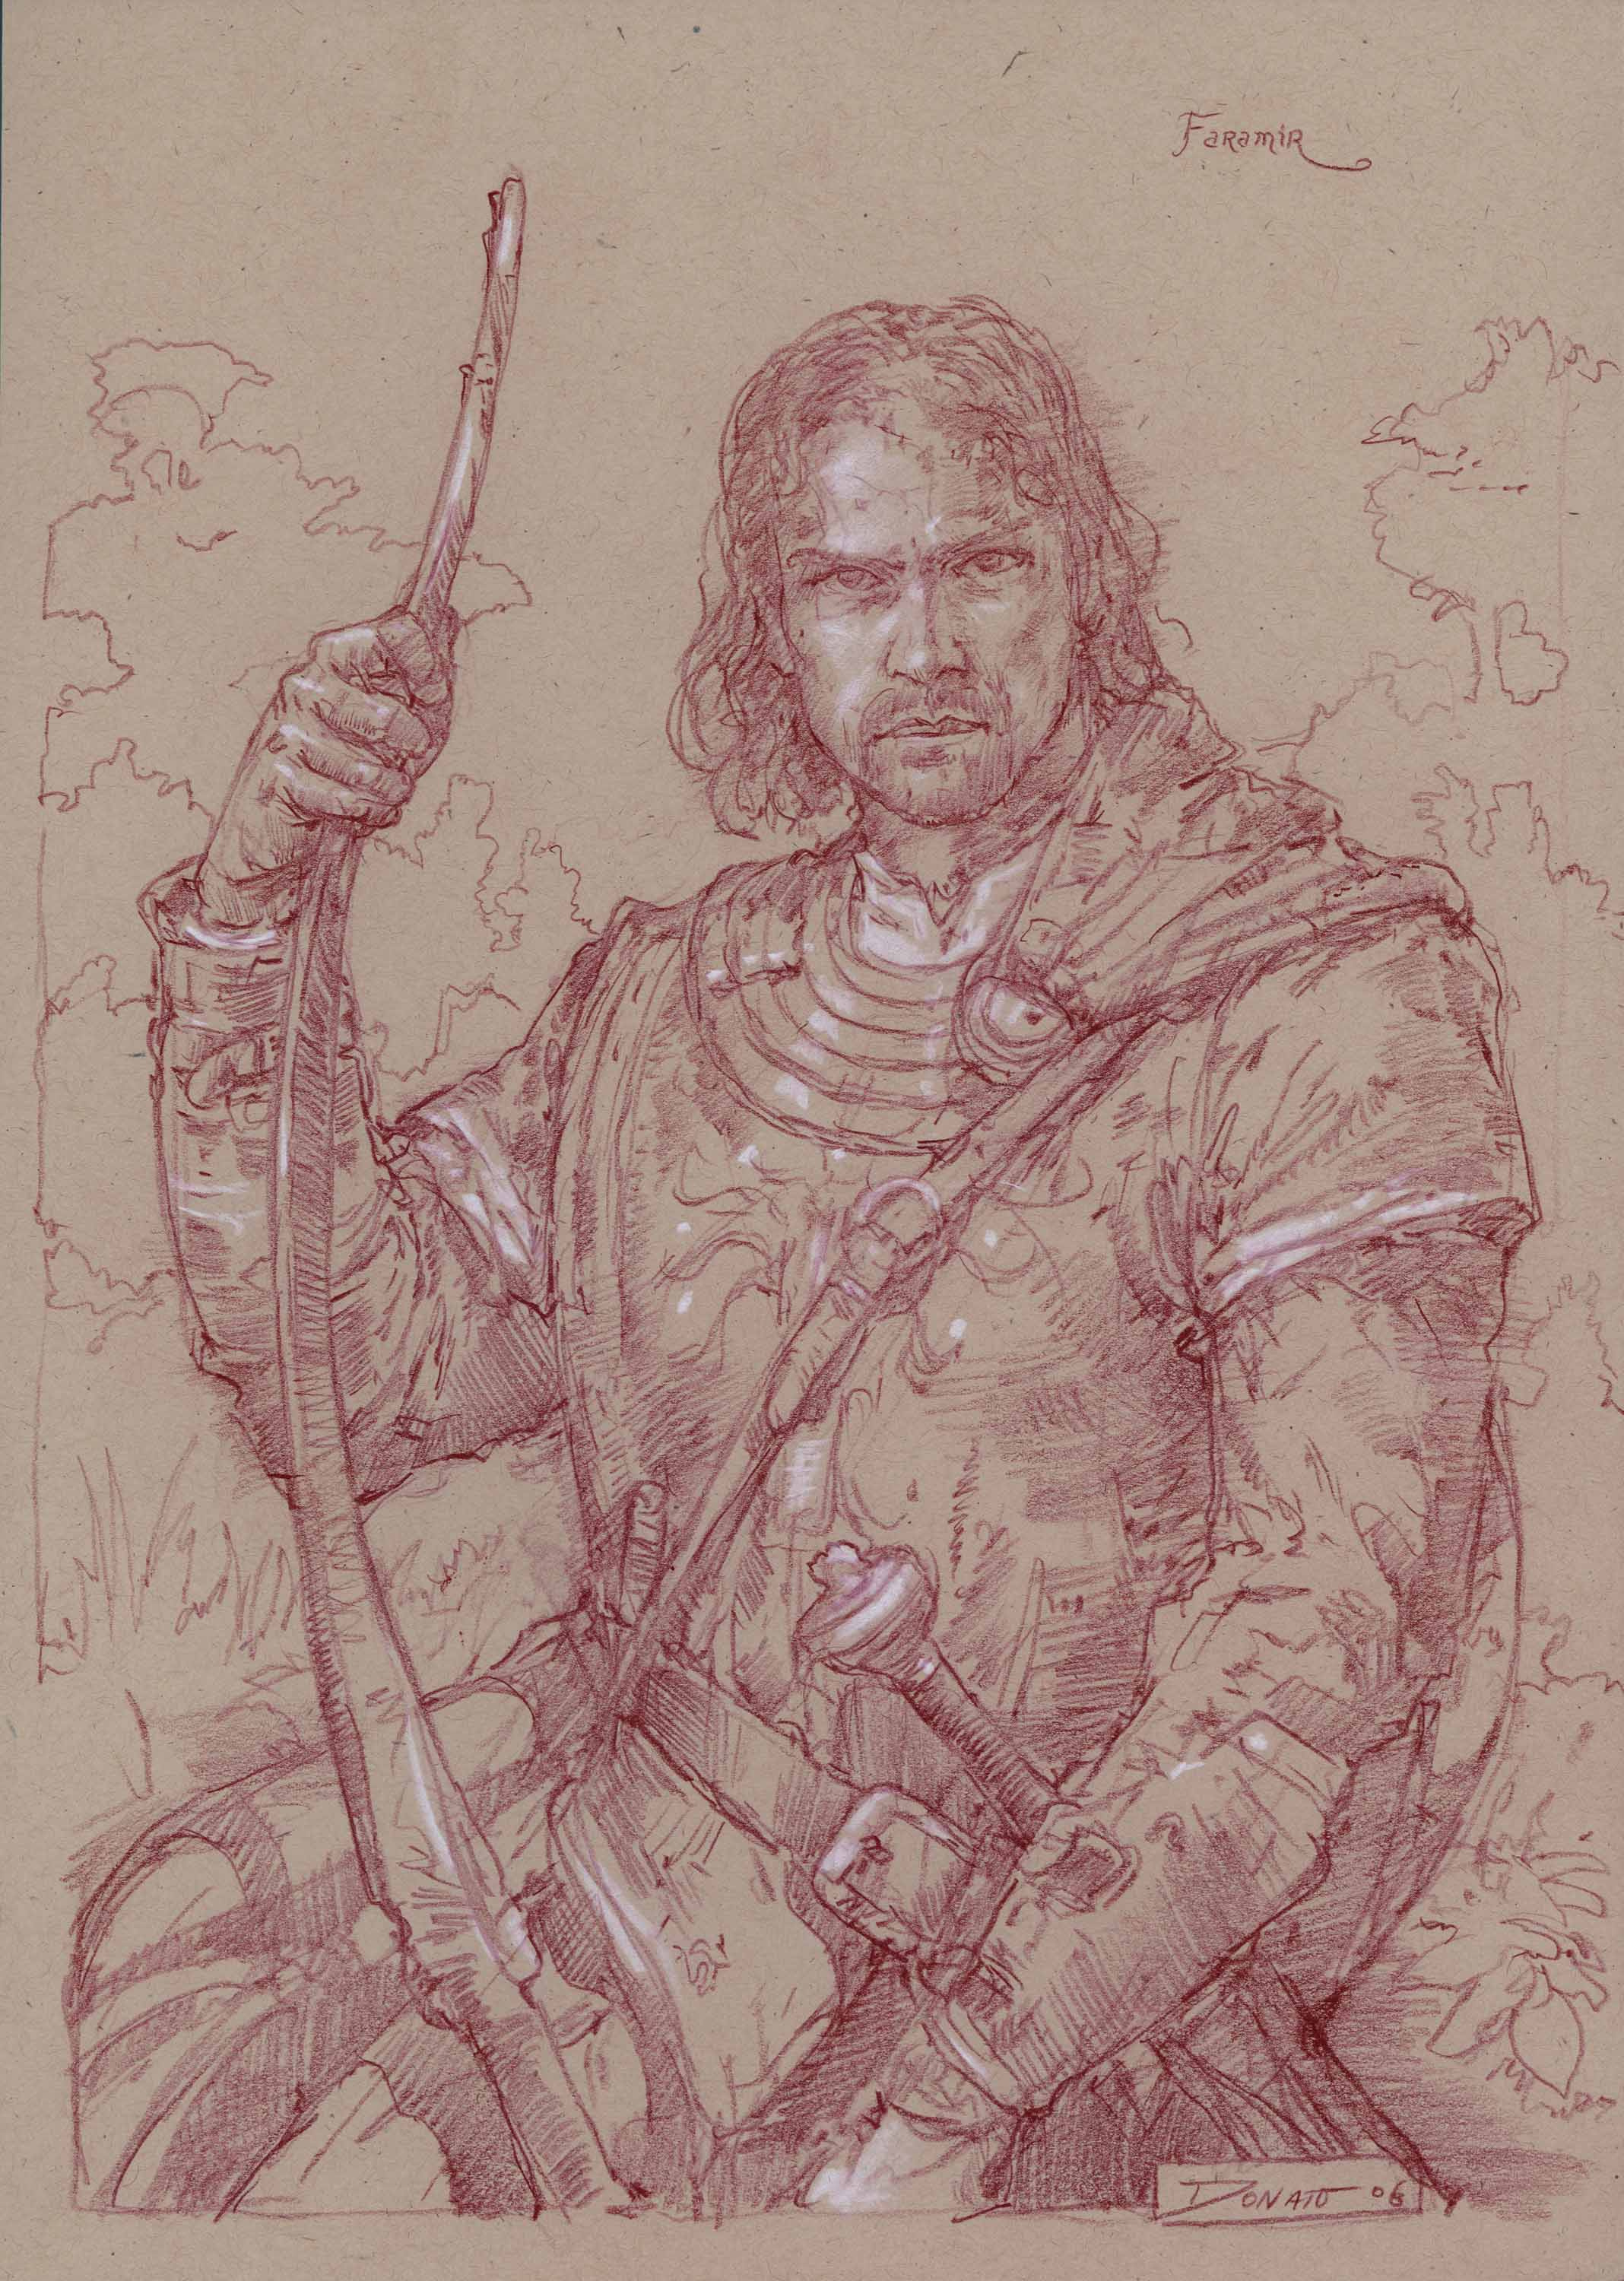 Faramir in Ithilien
14" x11"  Watercolor Pencil and Chalk on Toned paper 2006
private collection